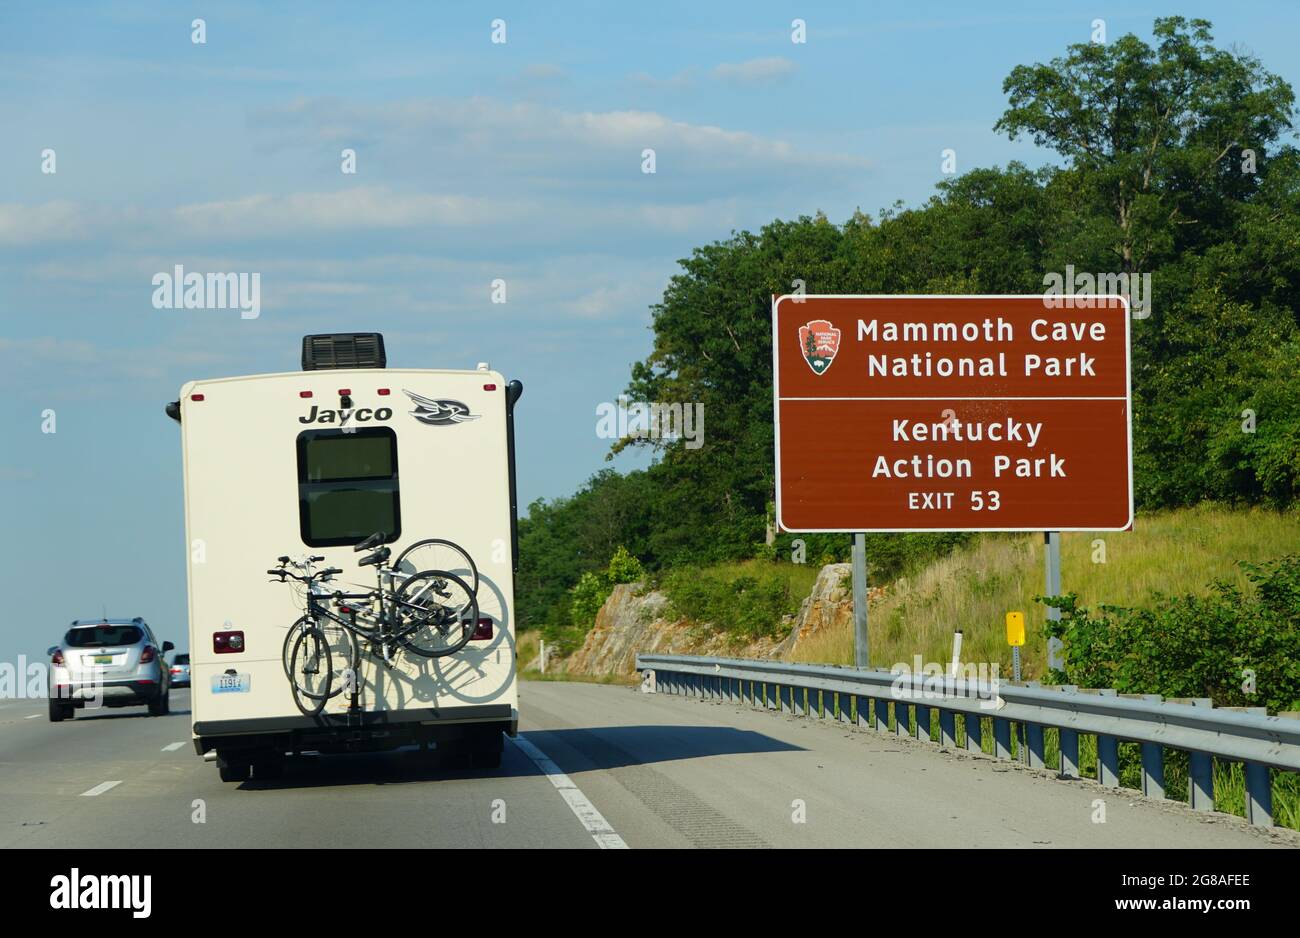 Kentucky, U.S.A - June 16, 2021 - An RV on the highway near the exit into Mammoth Cave National Park Stock Photo